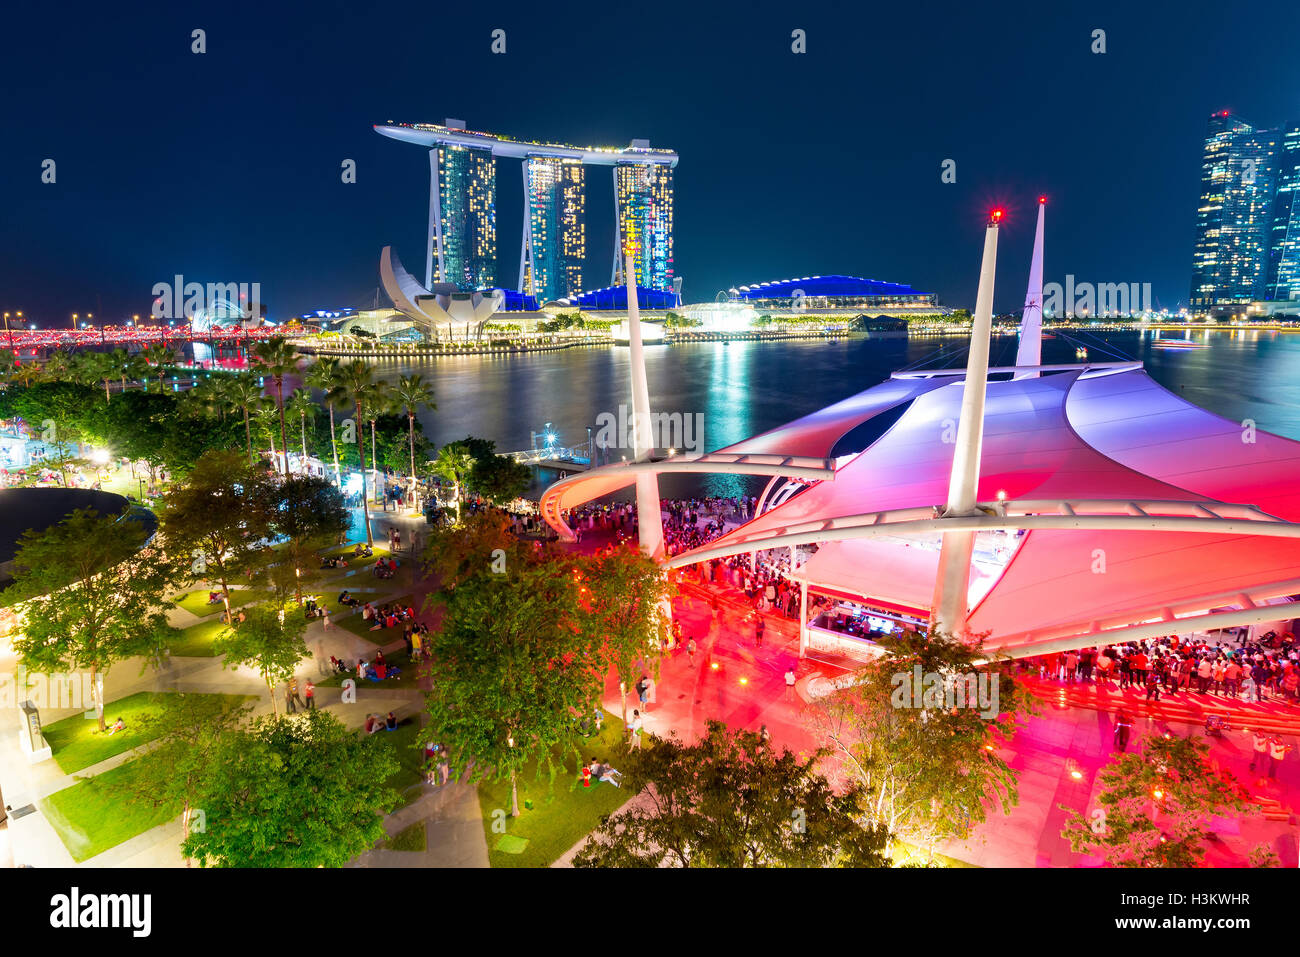 SINGAPORE, SINGAPORE - AUG 9 : 51st Independence Day anniversary of Singapore,The National Day of Singapore is celebrated annual Stock Photo